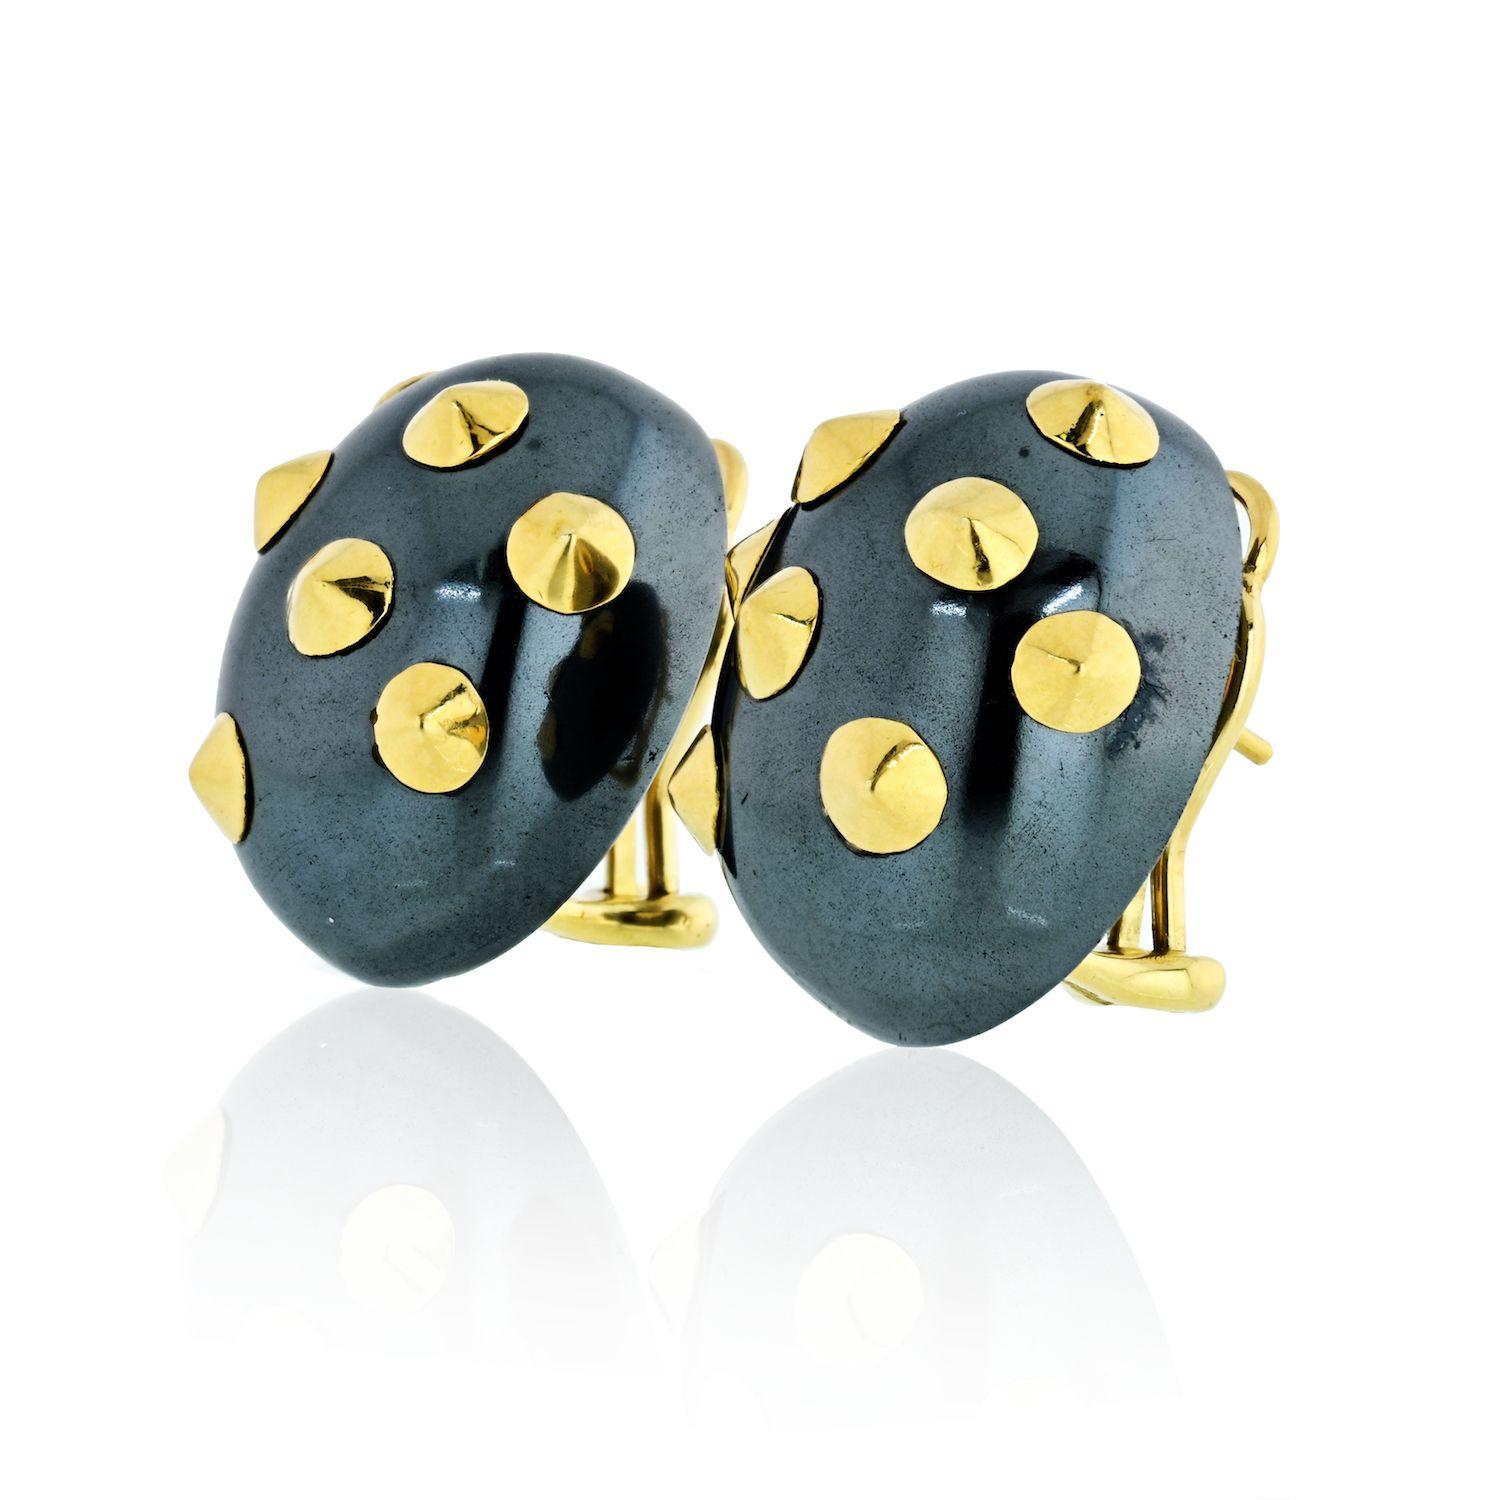 A Pair of Hematite and Gold Earclips. Each designed as a bombé hematite plaque enhanced by polished gold appliqués, mounted in 18K yellow gold, length 1 inch.
Signed 'Cummings'
